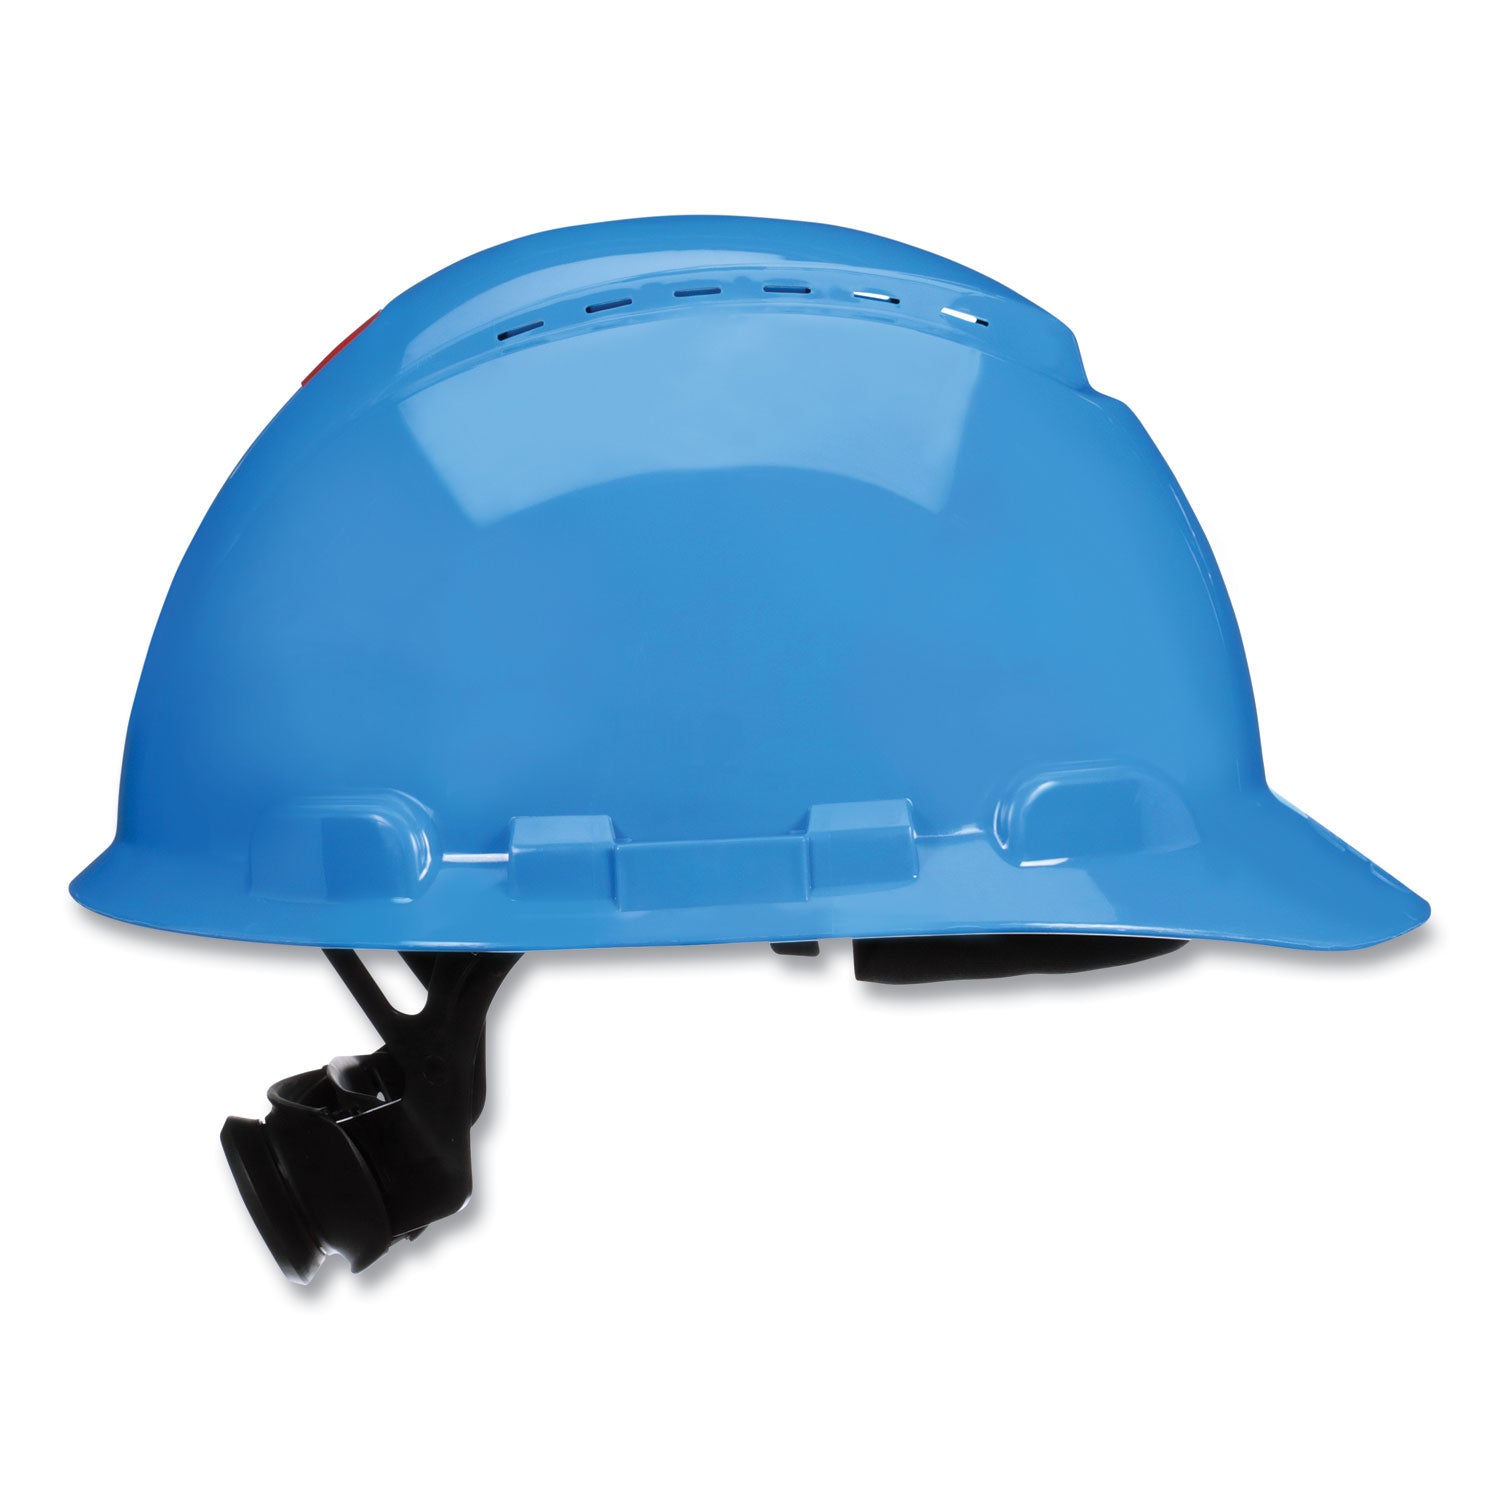 securefit-h-series-hard-hats-h-700-vented-cap-with-uv-indicator-4-point-pressure-diffusion-ratchet-suspension-blue_mmmh703sfvuv - 2